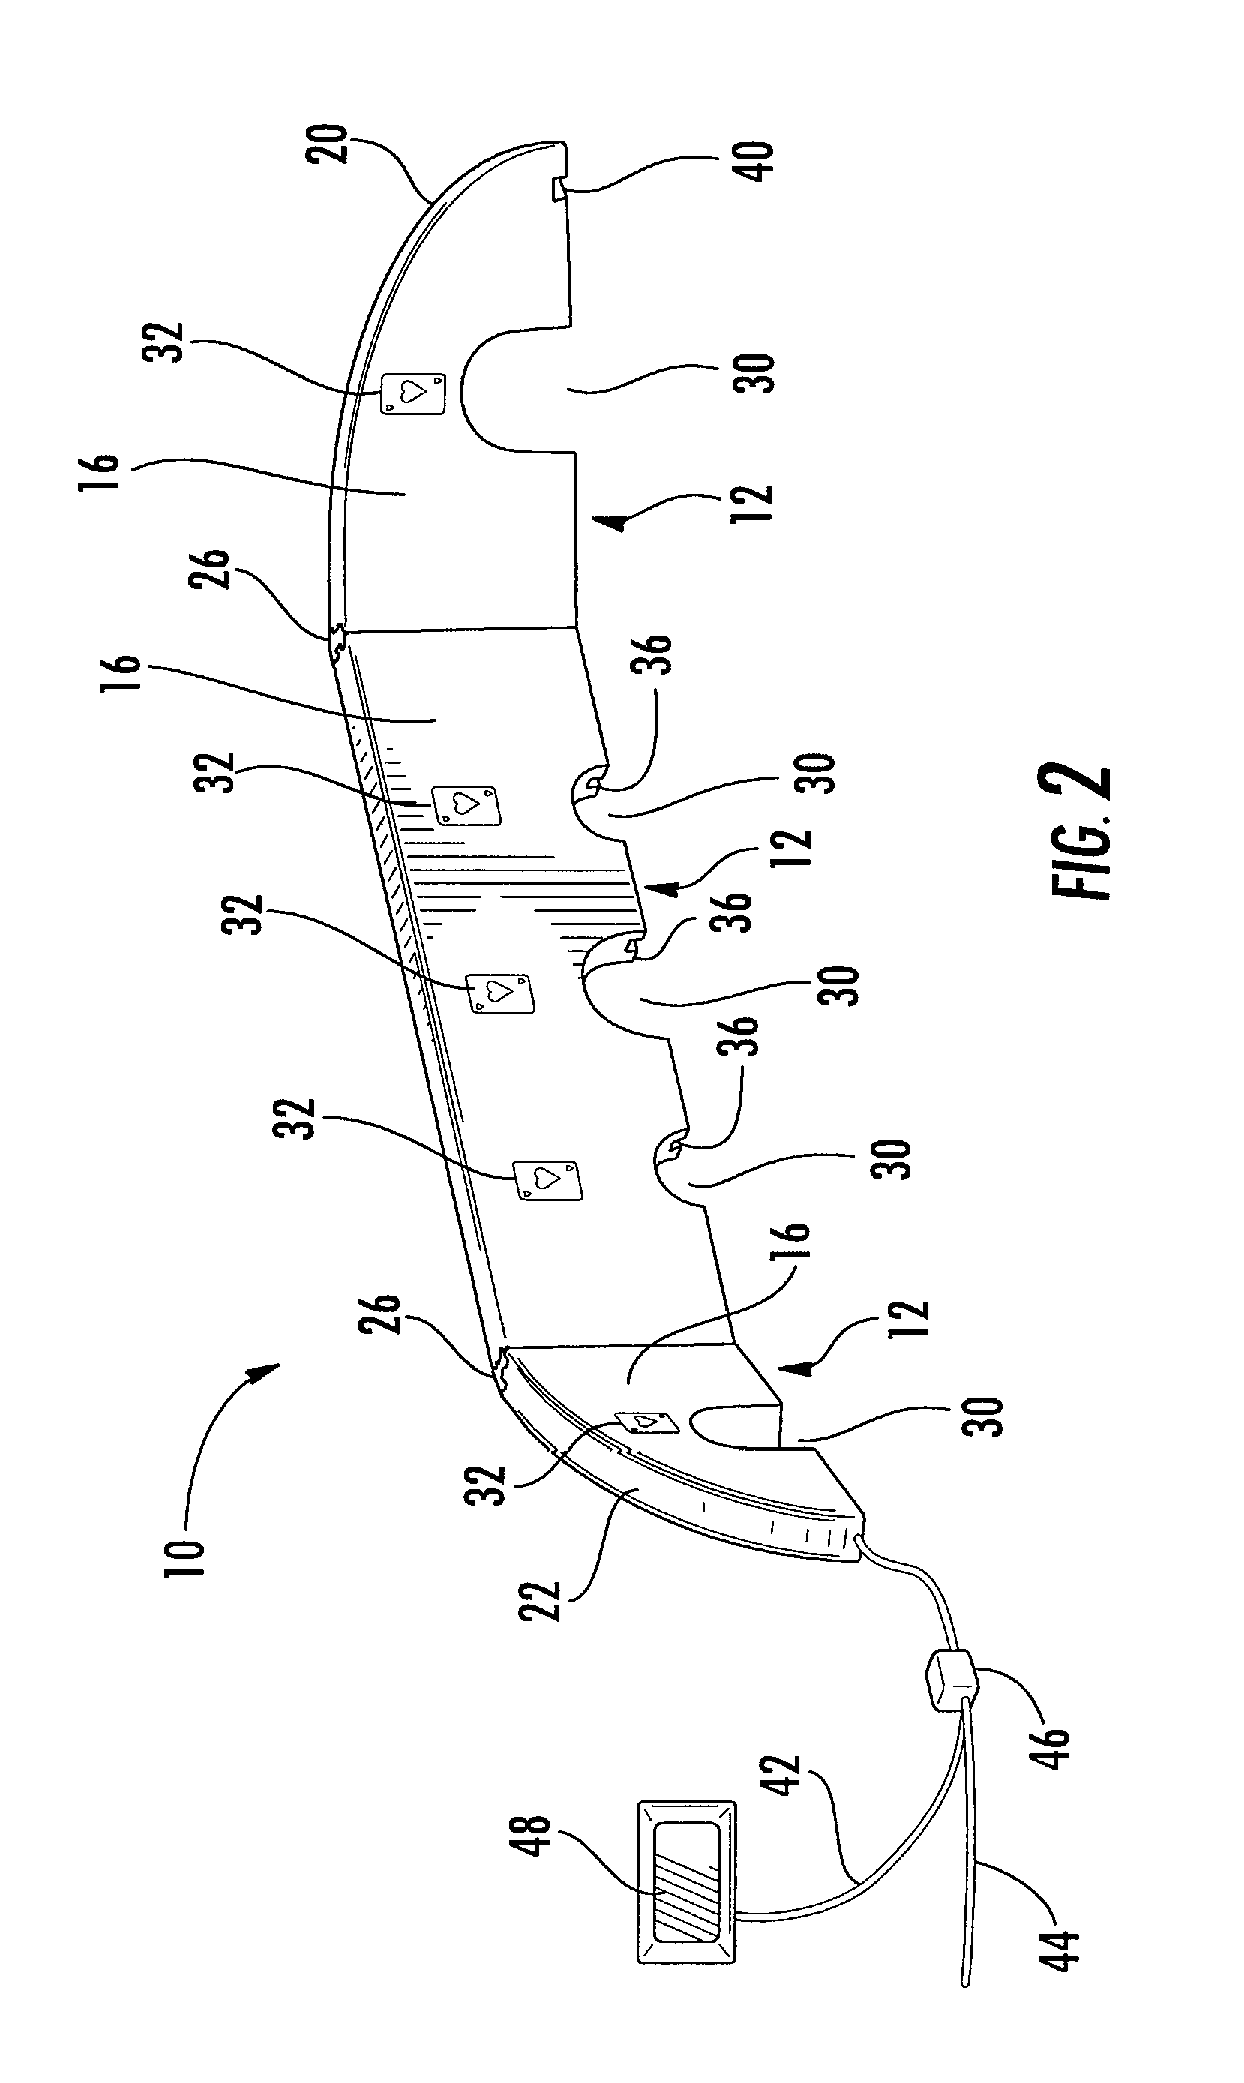 Golf practice game apparatus with sensors